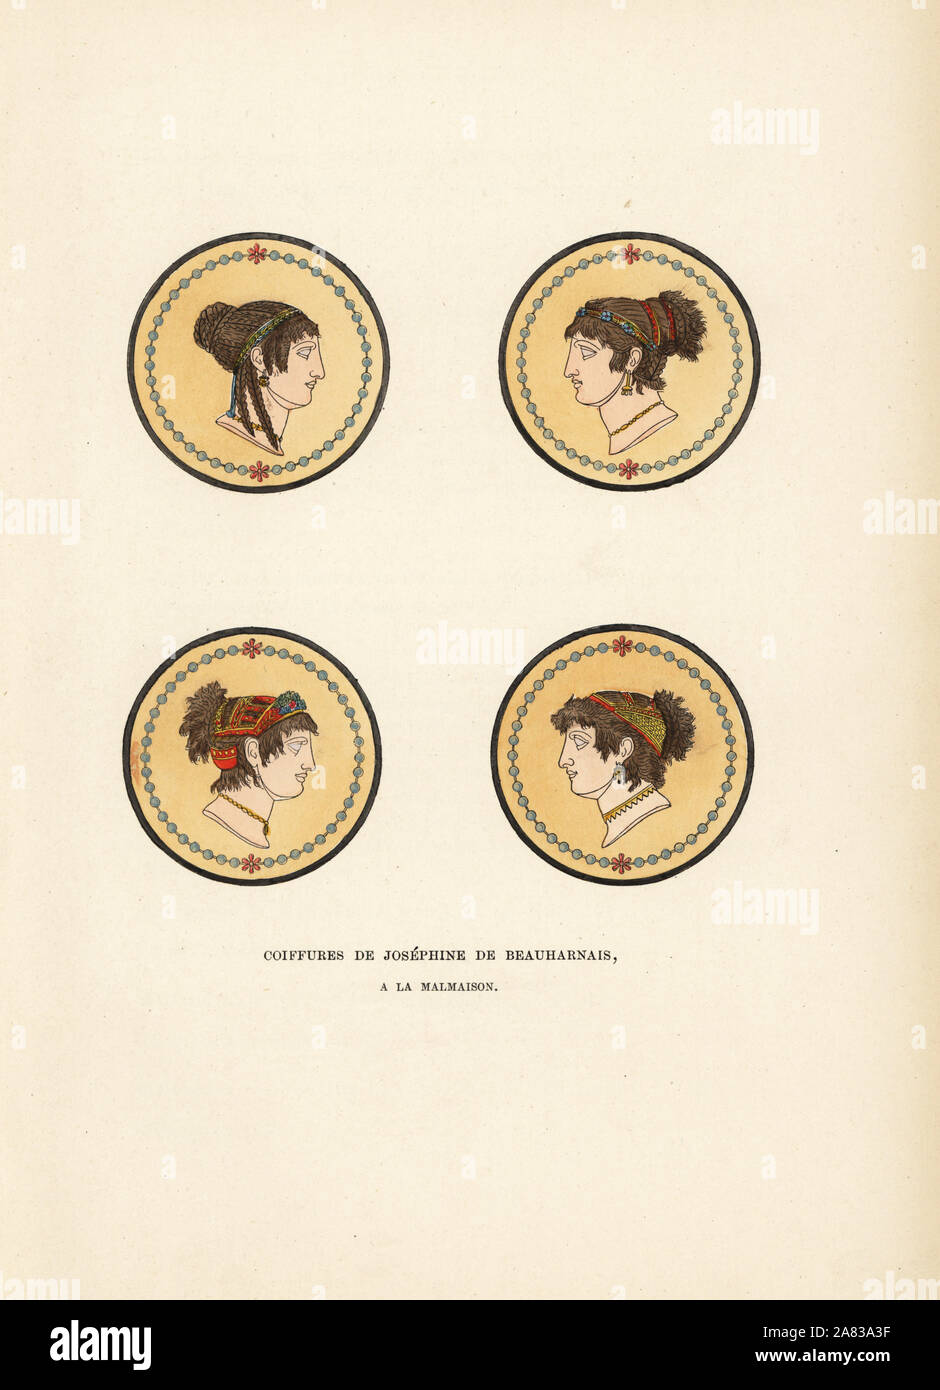 Hairstyles of Josephine de Beauharnais, 1788, later wife to Napoleon, from murals in the bathrooms at Malmaison in the Roman style. Handcoloured lithograph from Fashions and Customs of Marie Antoinette and her Times, by Le Comte de Reiset, Paris, 1885. The journal of Madame Eloffe, dressmaker and linen-merchant to the Queen and ladies of the court. Stock Photo